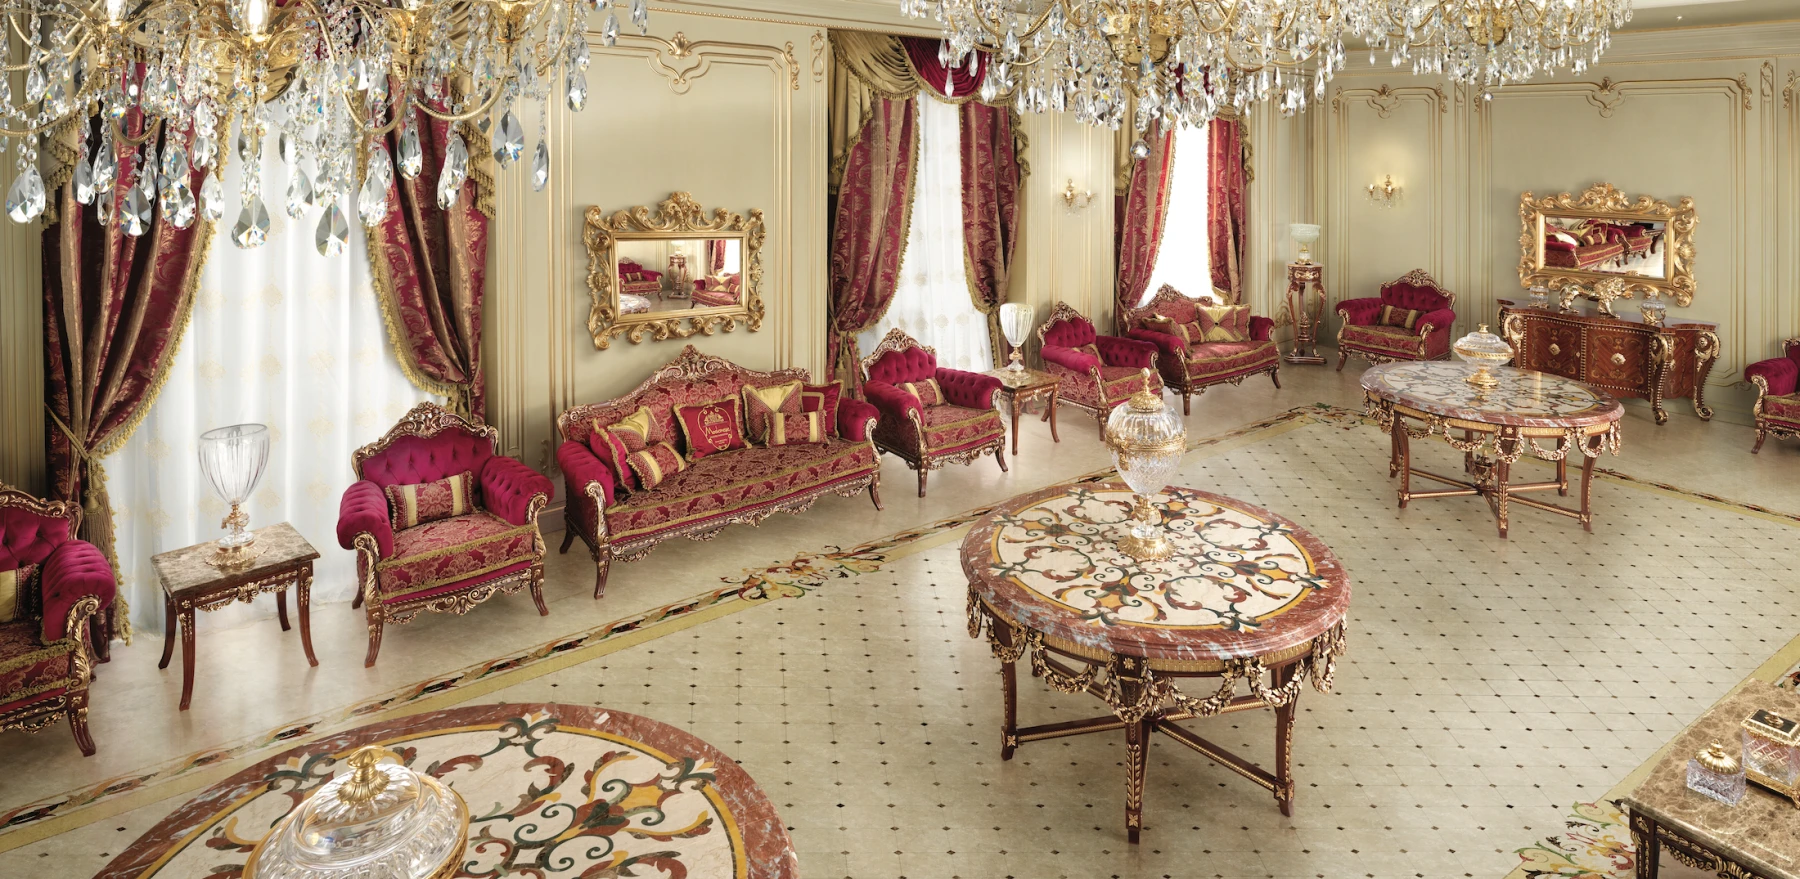 Elegant bespoke classic carved wood furniture with red fabric and inlaid marble tables